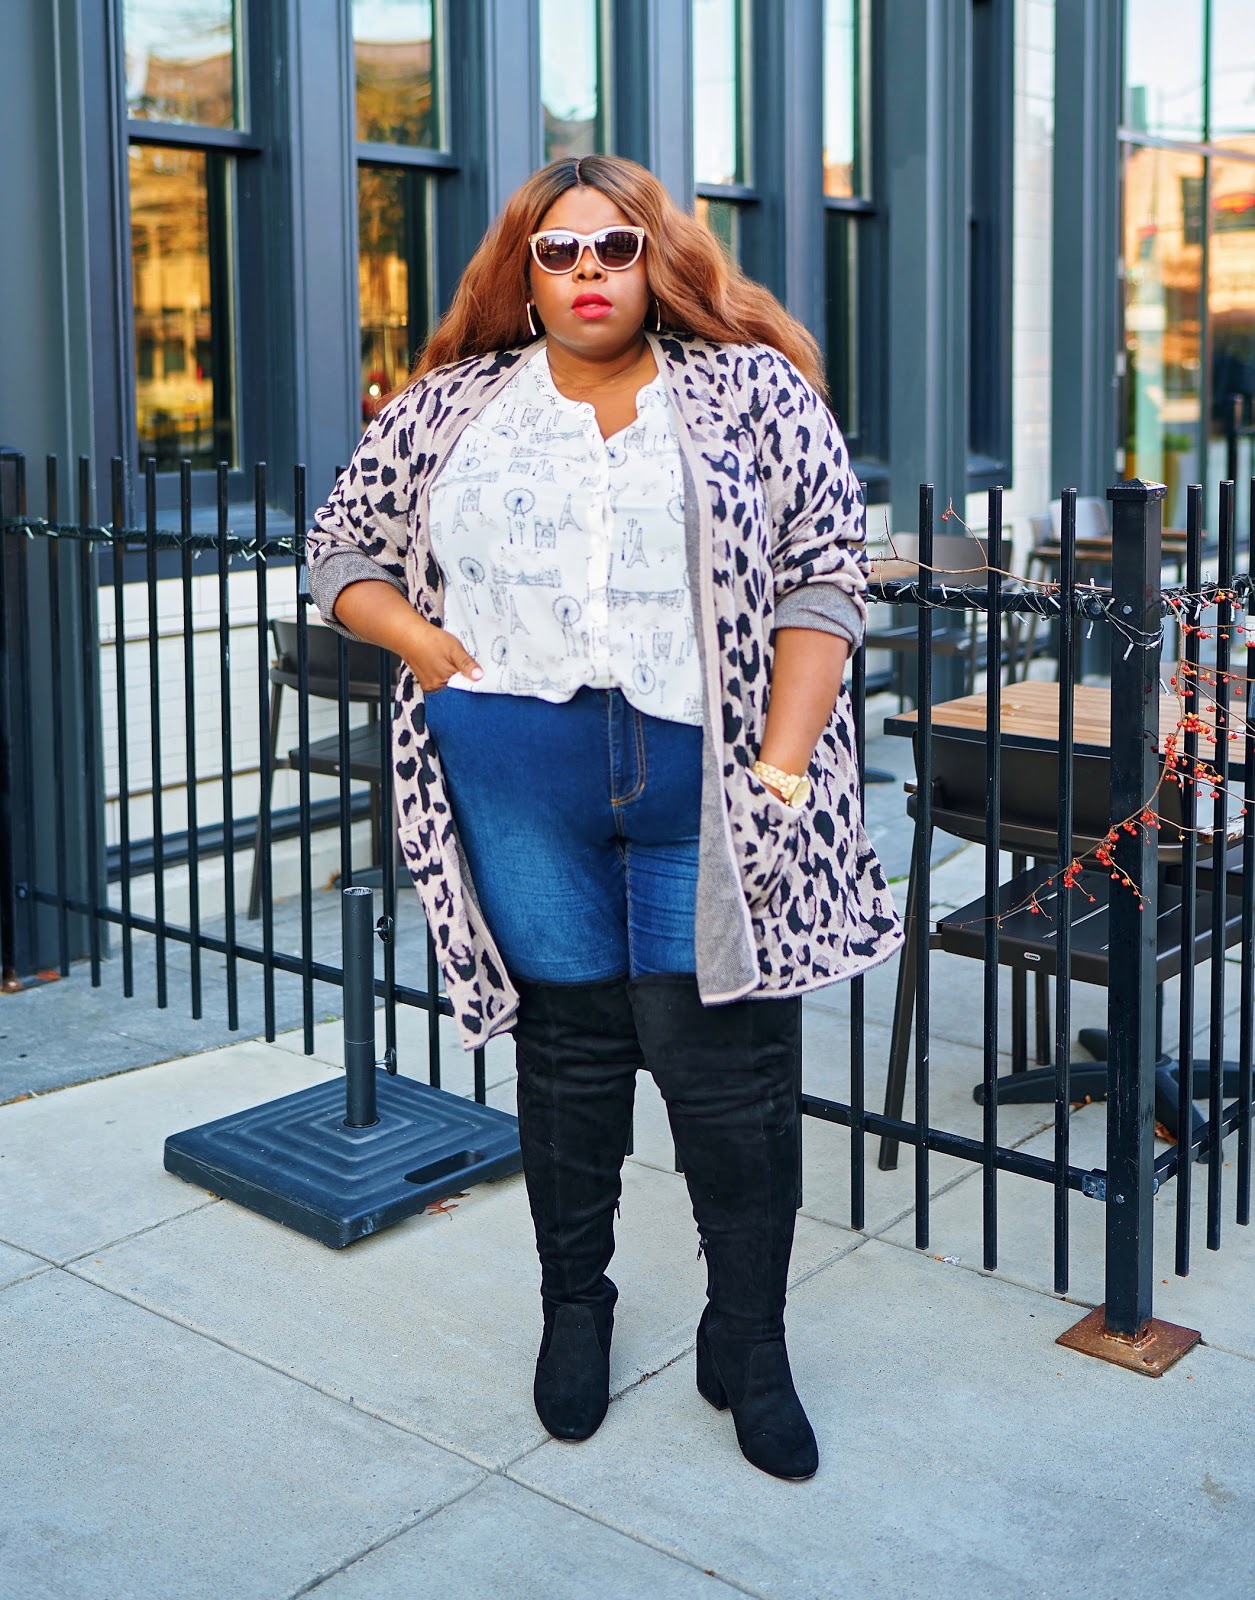 Leopard and Such | Heart, Print & Style